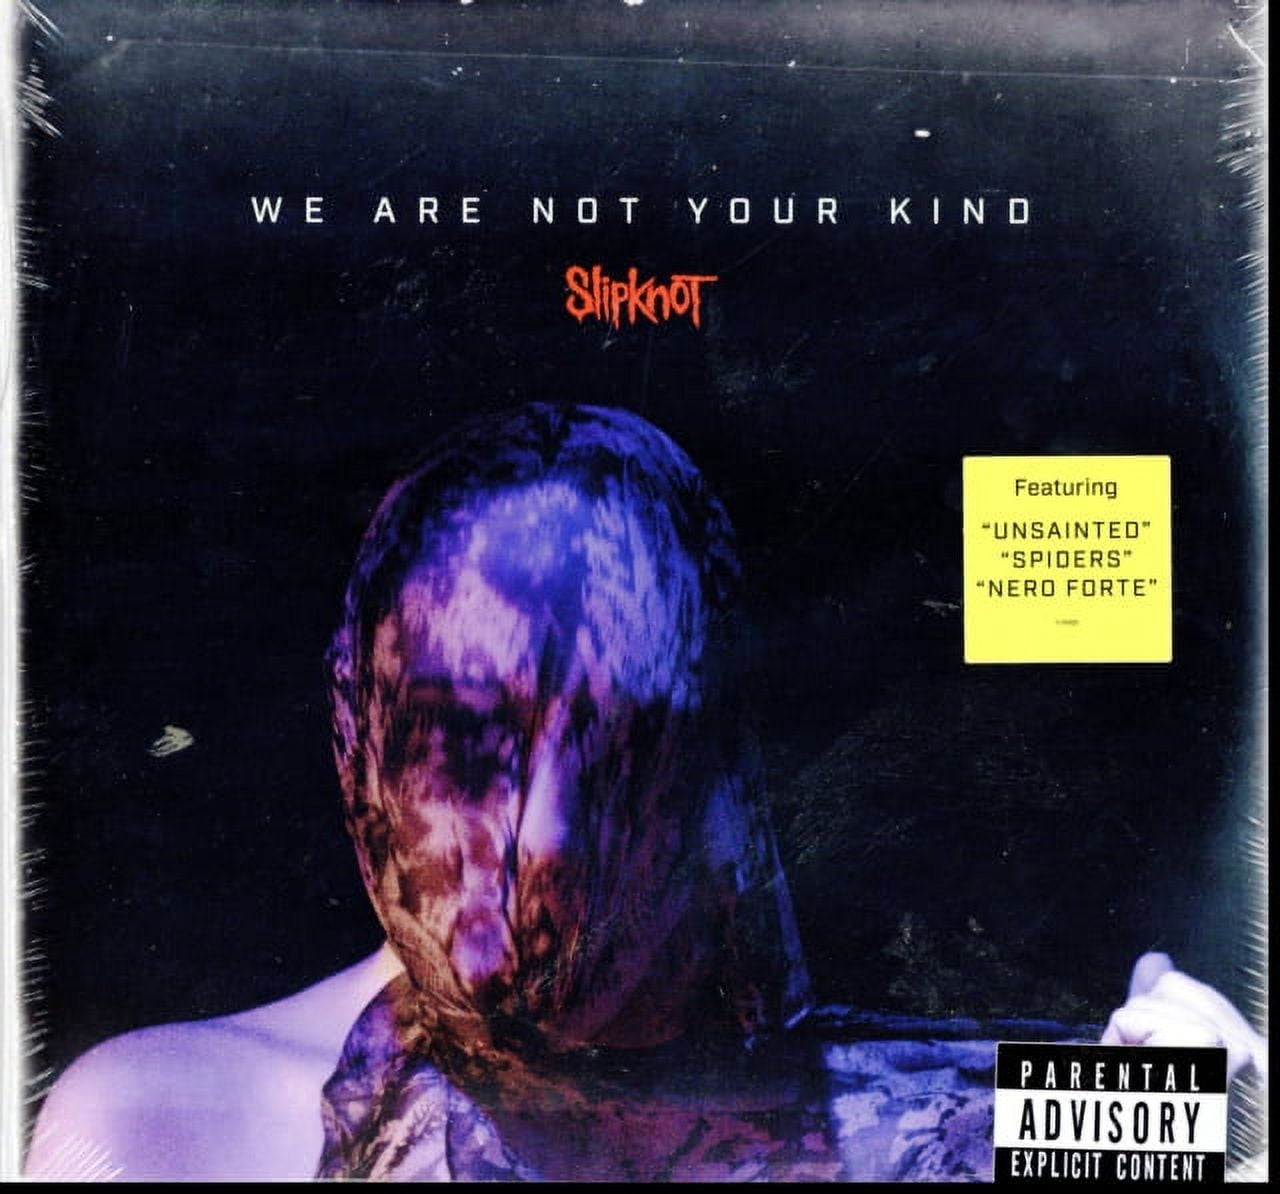 Slipknot - We are not your kind